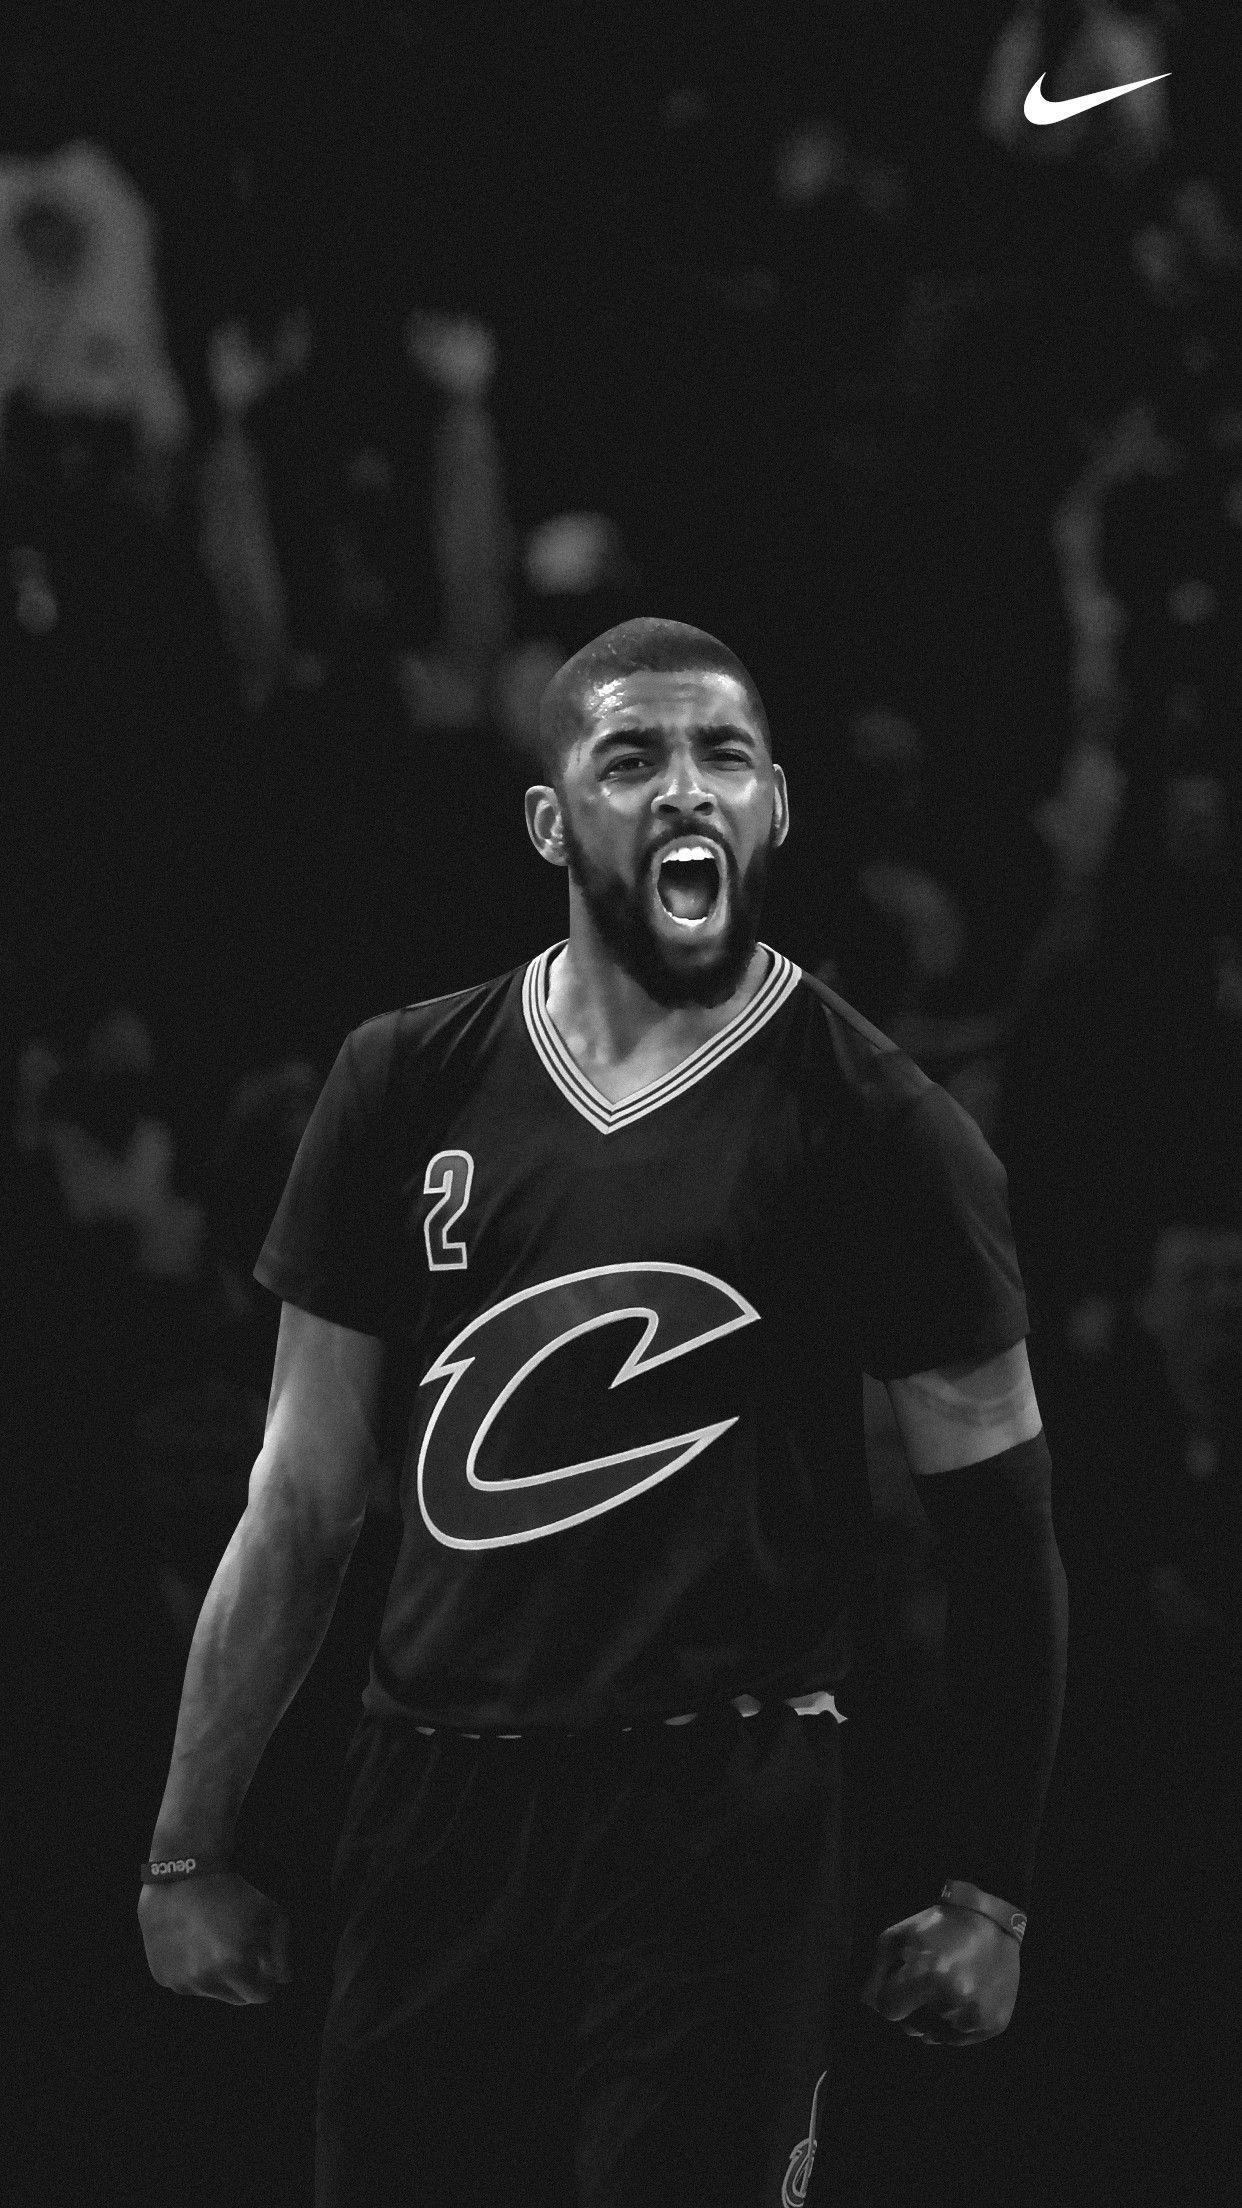 Kyrie Irving 41 Point Game Nike iPhone Wallpaper, clevelandcavs